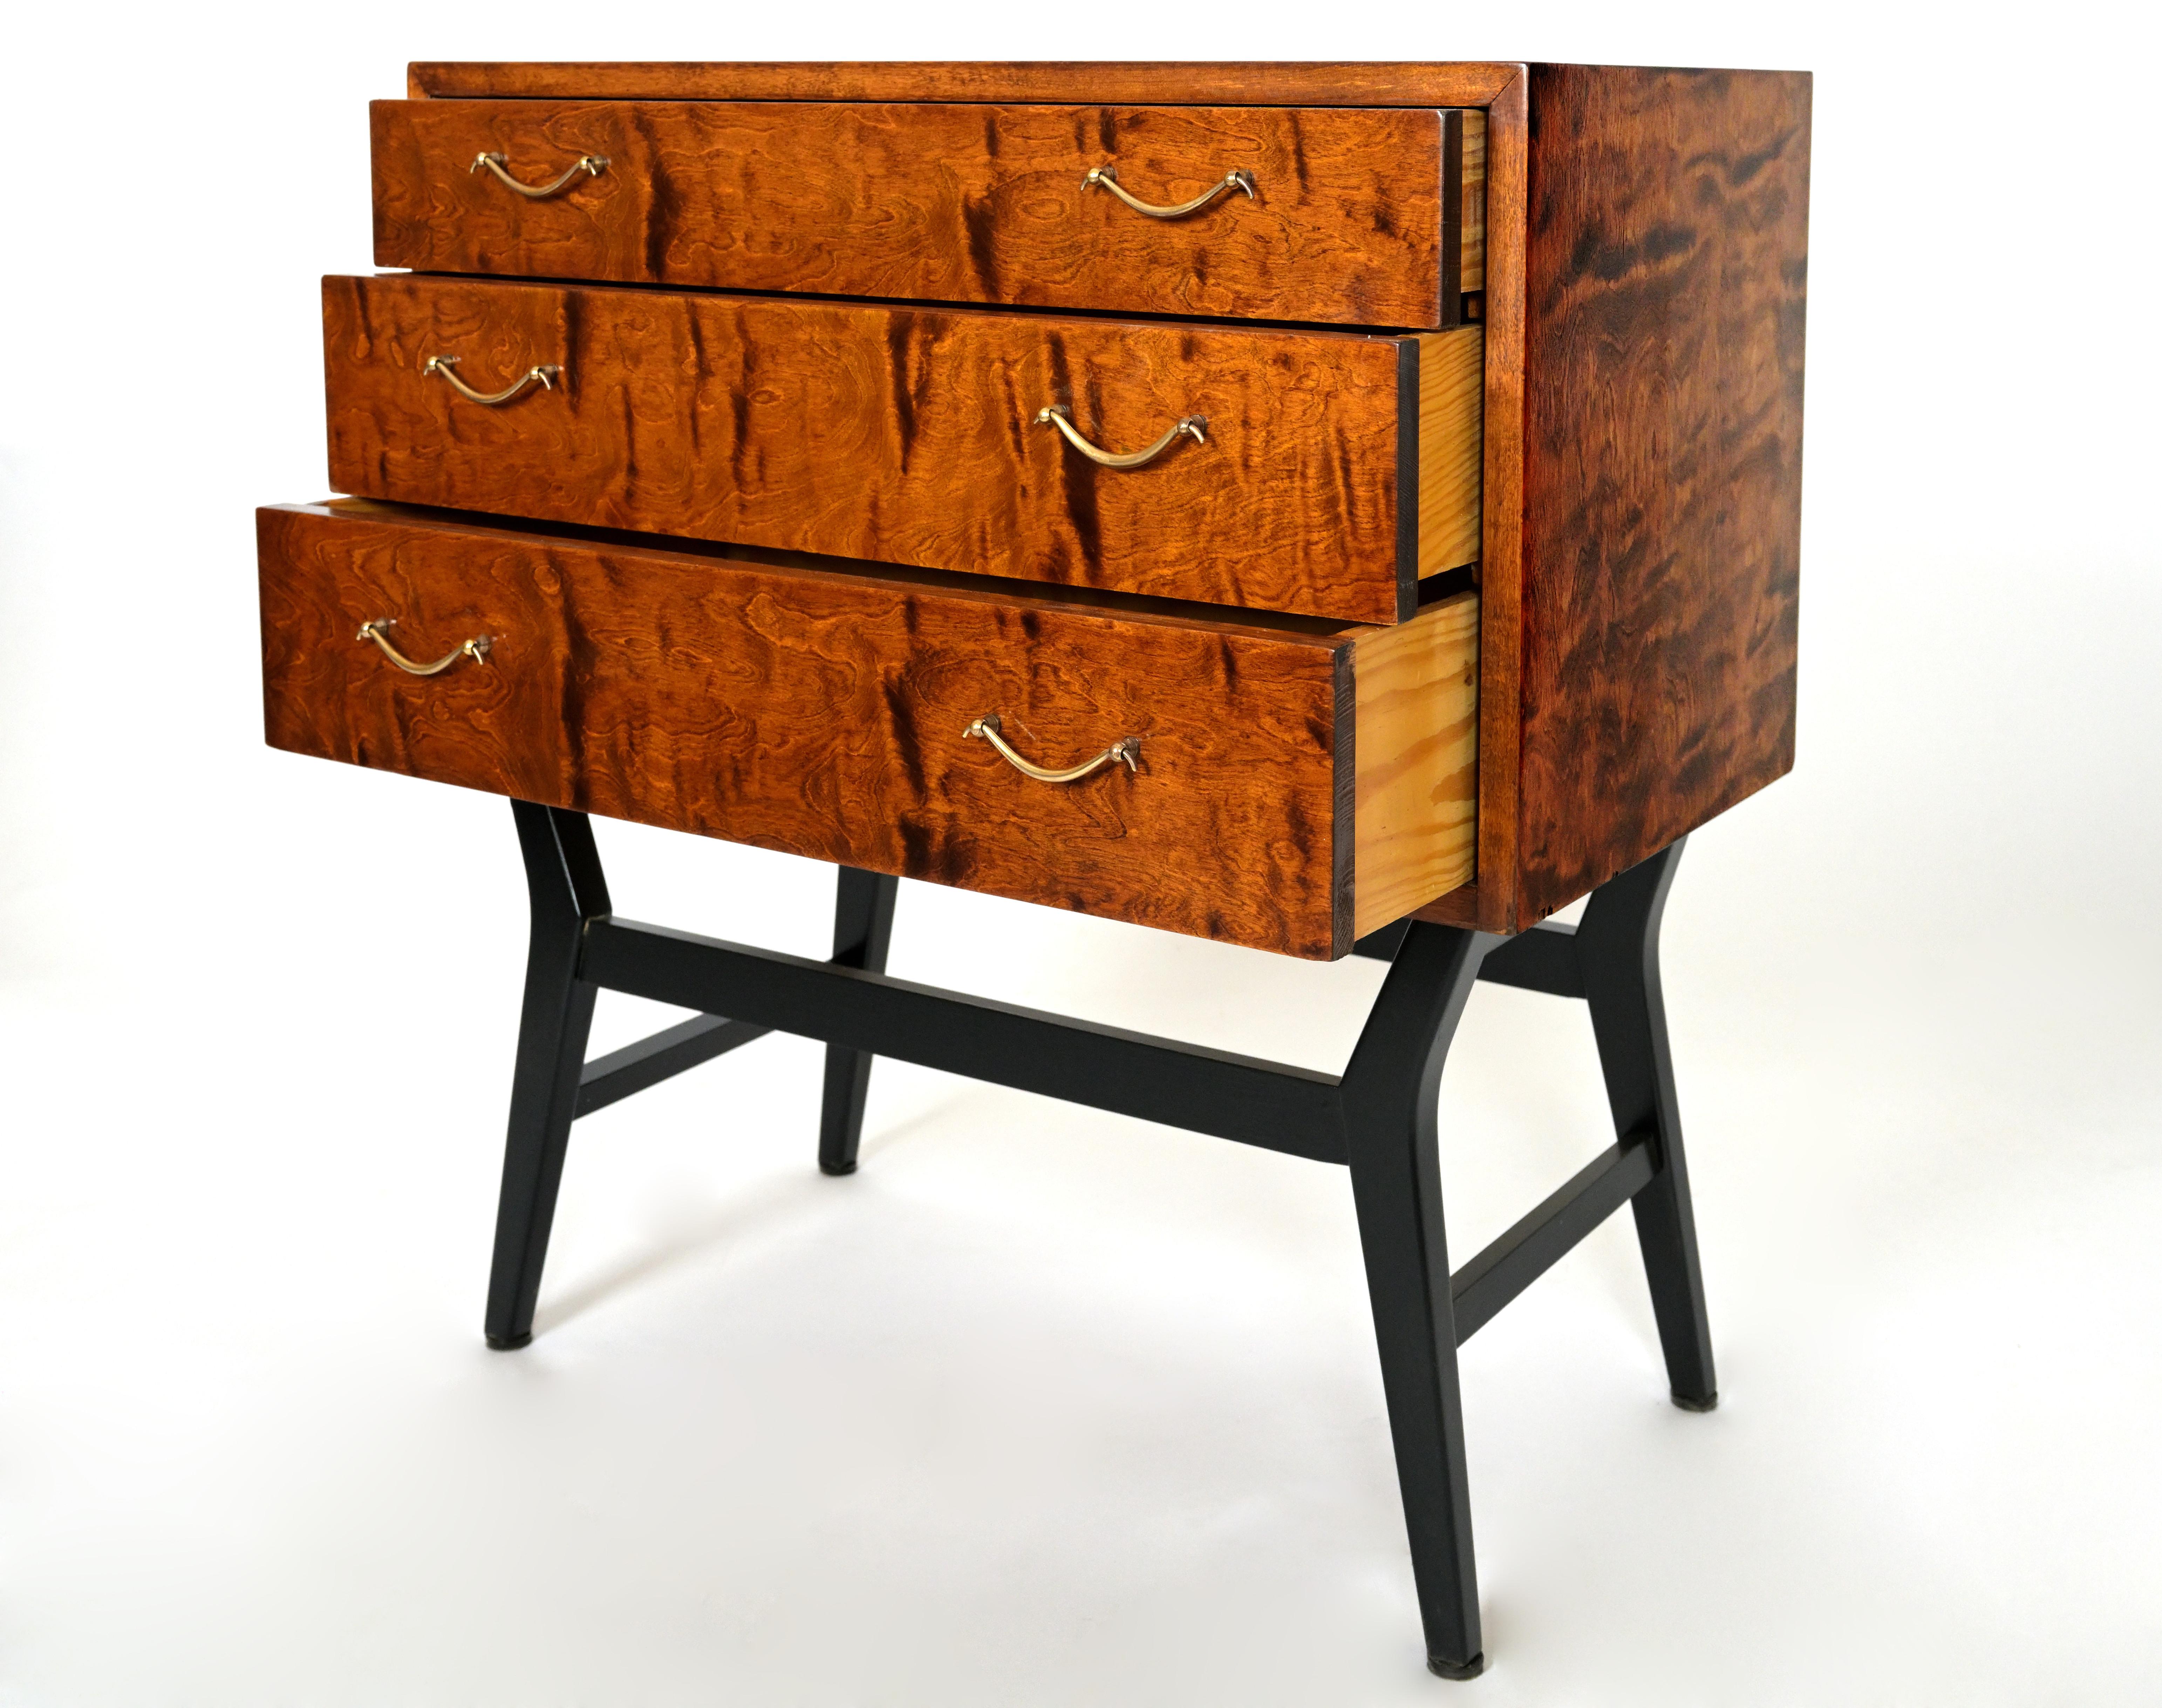 A birch Swedish Grace chest of drawers with  with highly figured birch veneer marbeling on the front, side and three drawers. Each drawer consists of two ring brass handles. The chest is supported by four tethered ebonized base with having side and